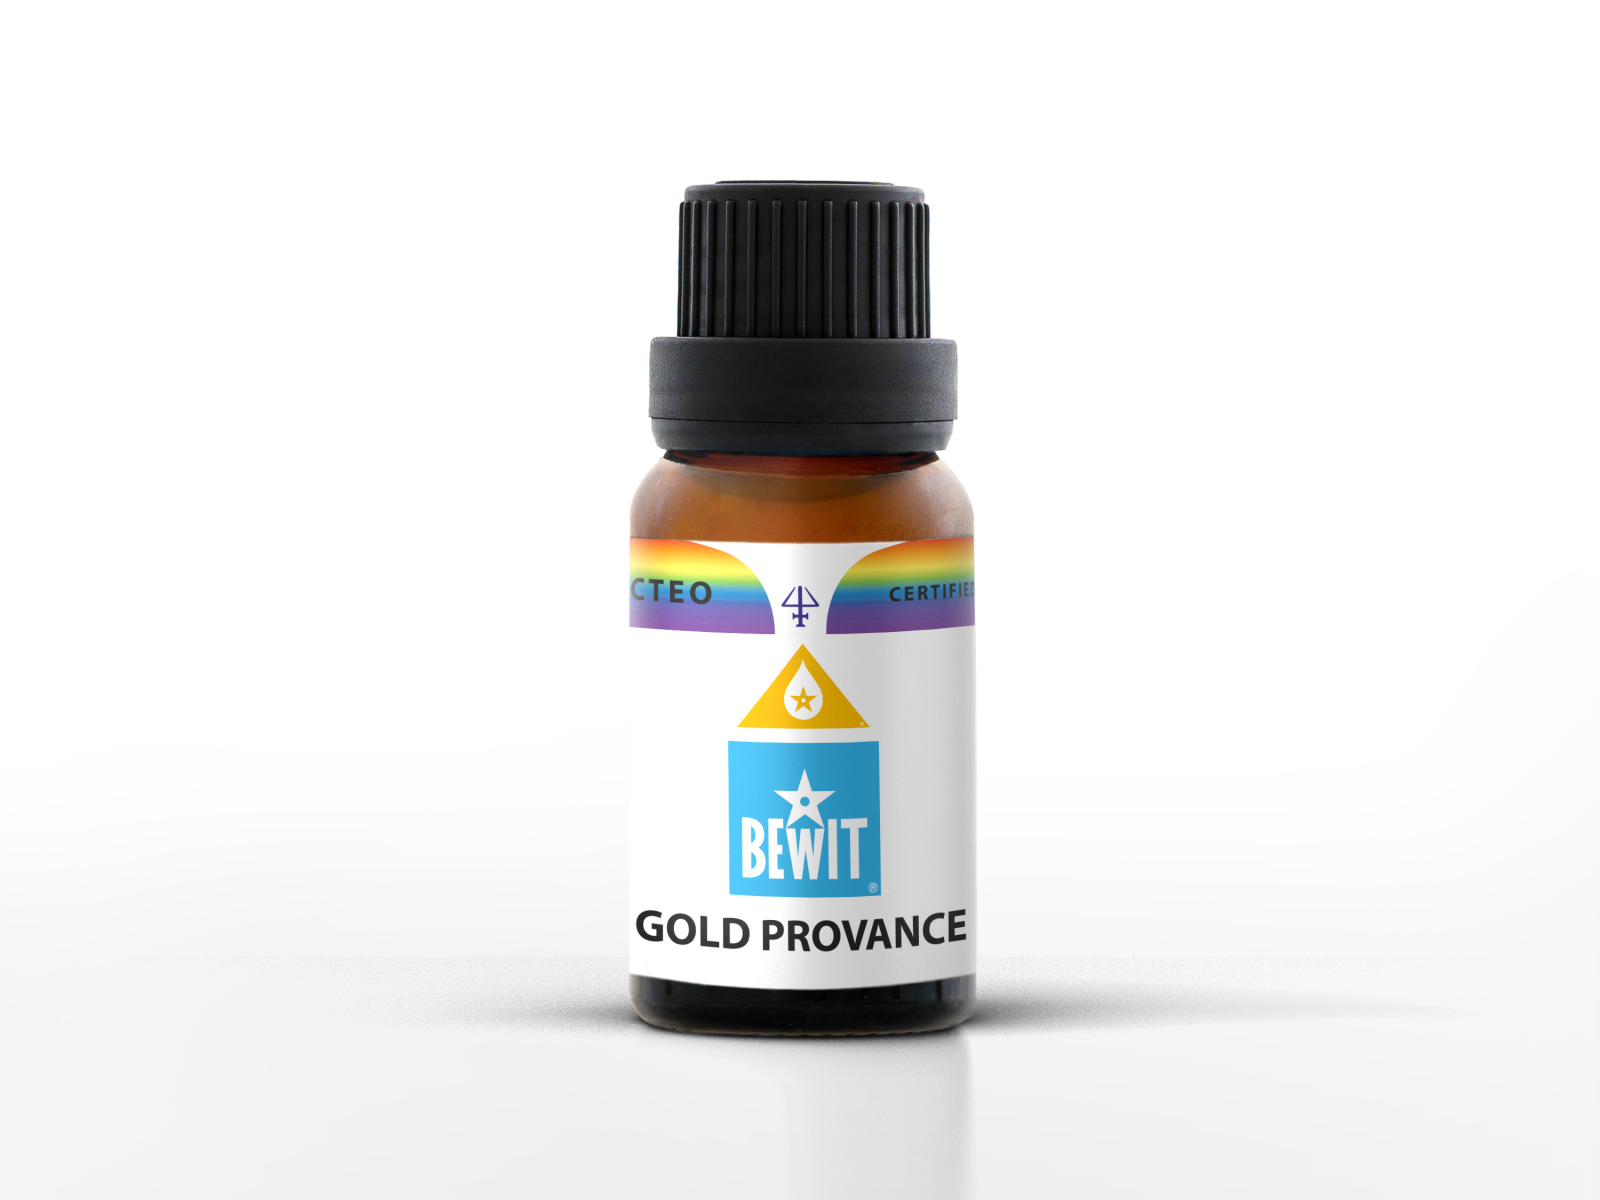 BEWIT GOLD PROVANCE